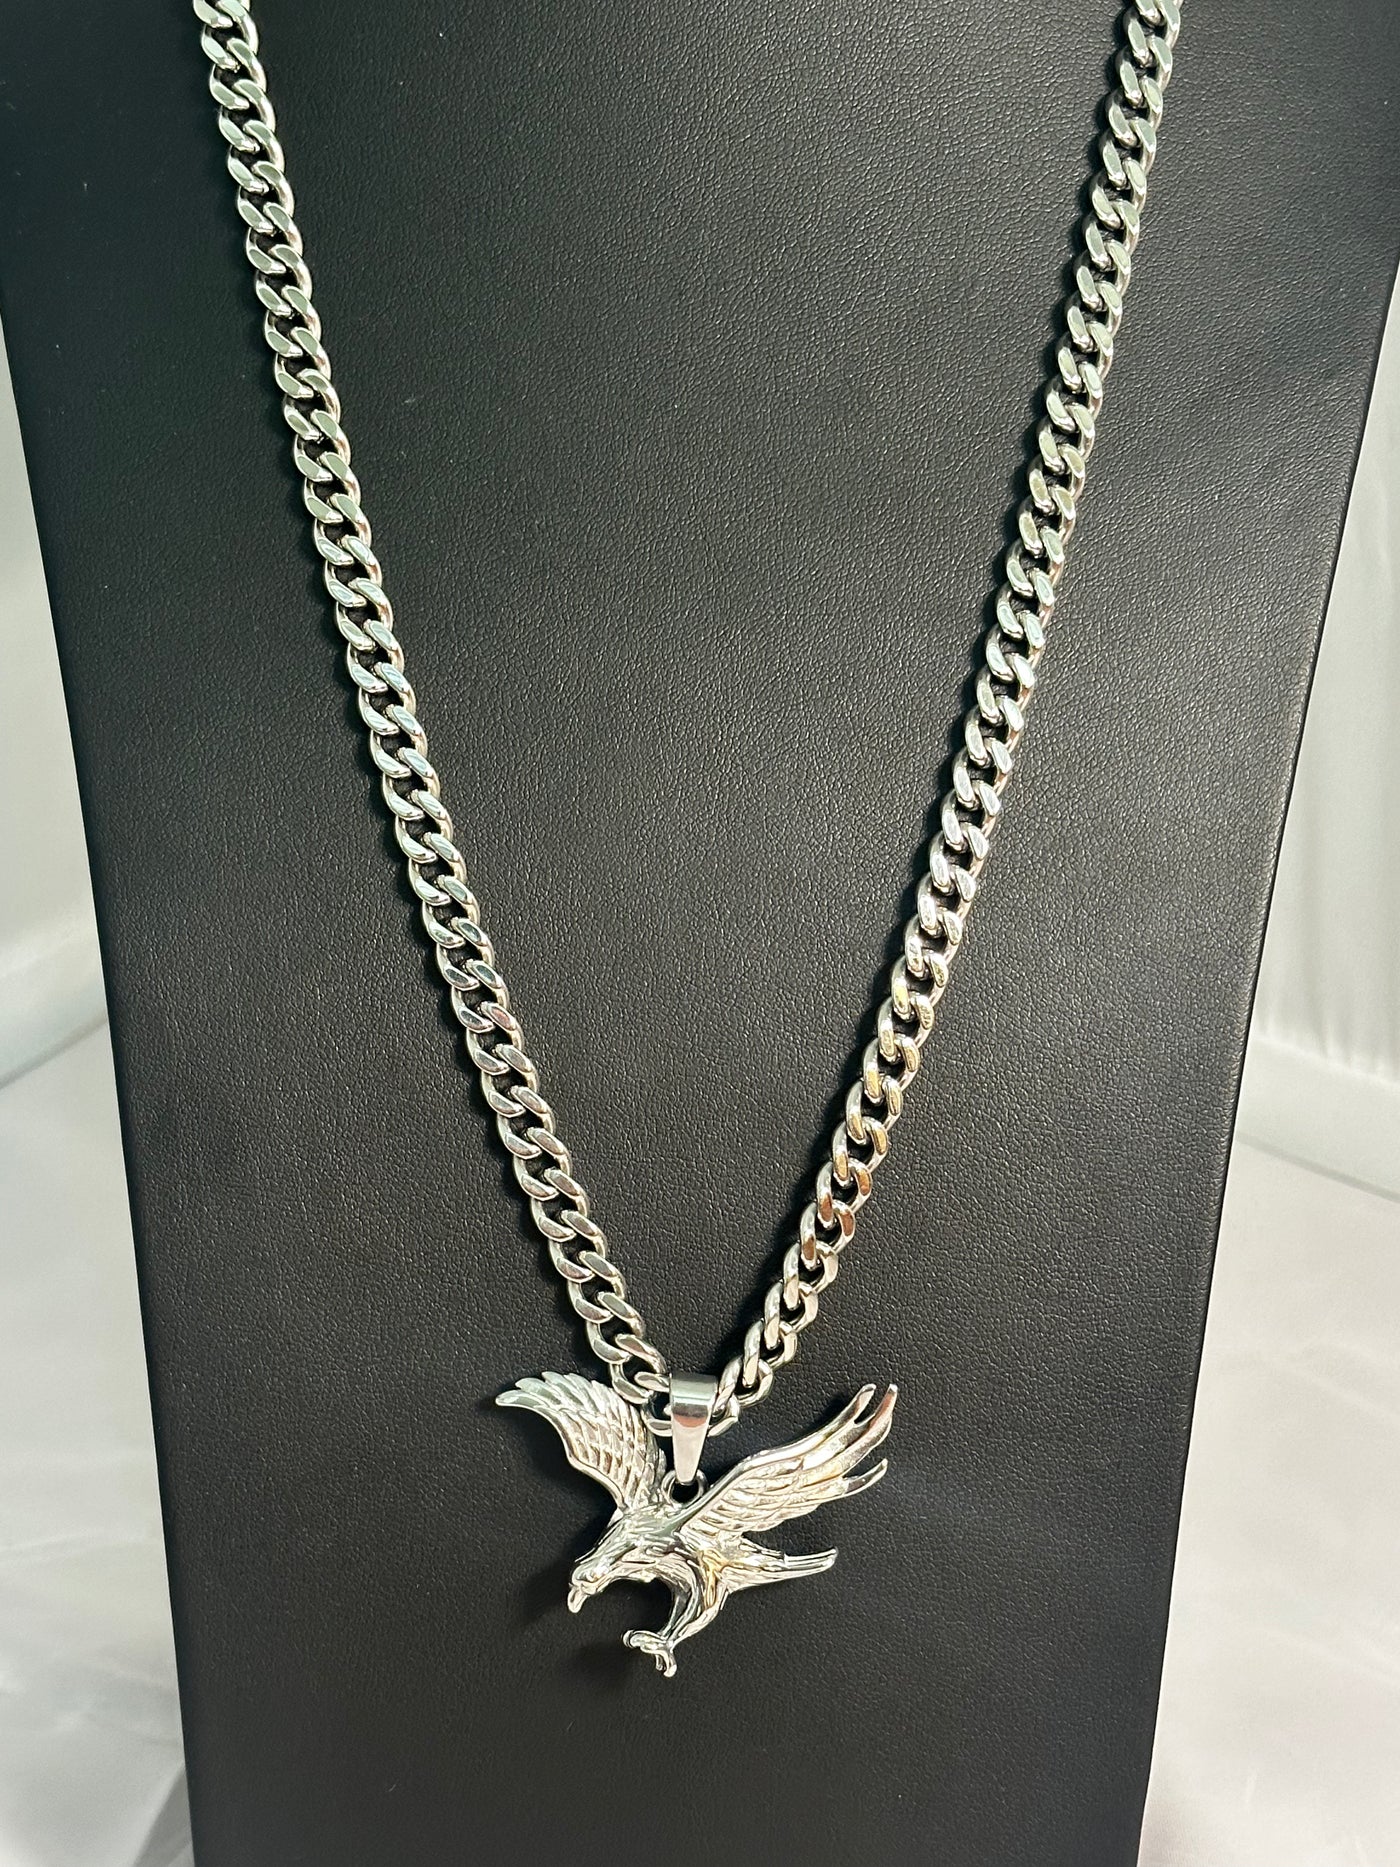 Silver Stainless Steel Eagle Soaring Necklace - Brent's Bling